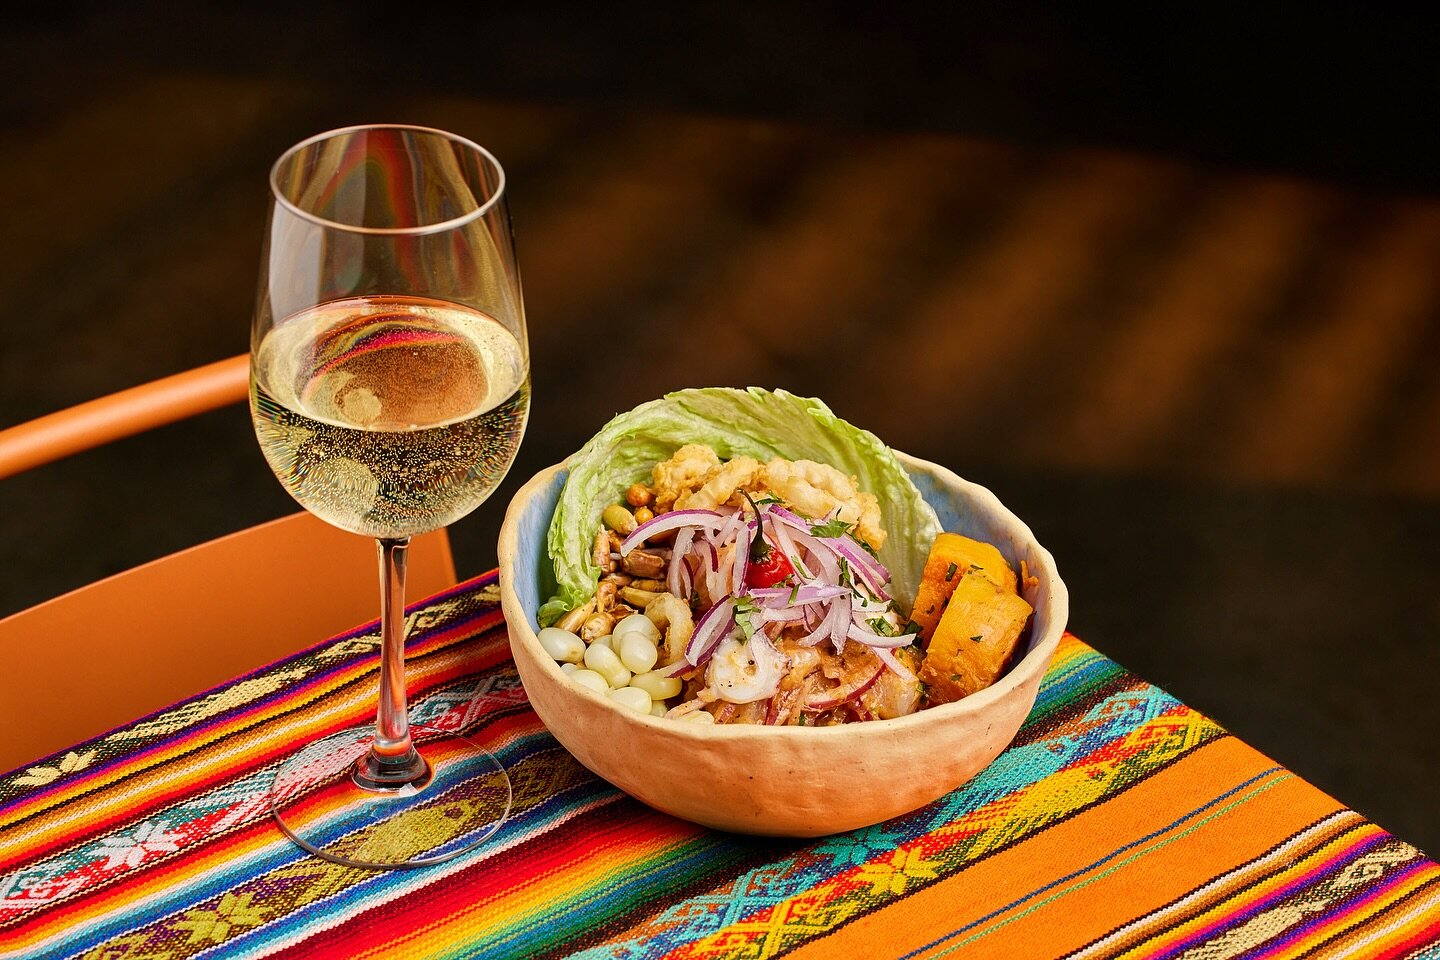 🐟 Love the perfect pairing of ceviche and wine? 🌮🍋🥂 Ceviche, a refreshing and tangy seafood dish, complements the flavors of a glass of wine beautifully. The acidity in ceviche enhances the fruity notes of white wines, while the citrusy flavors i